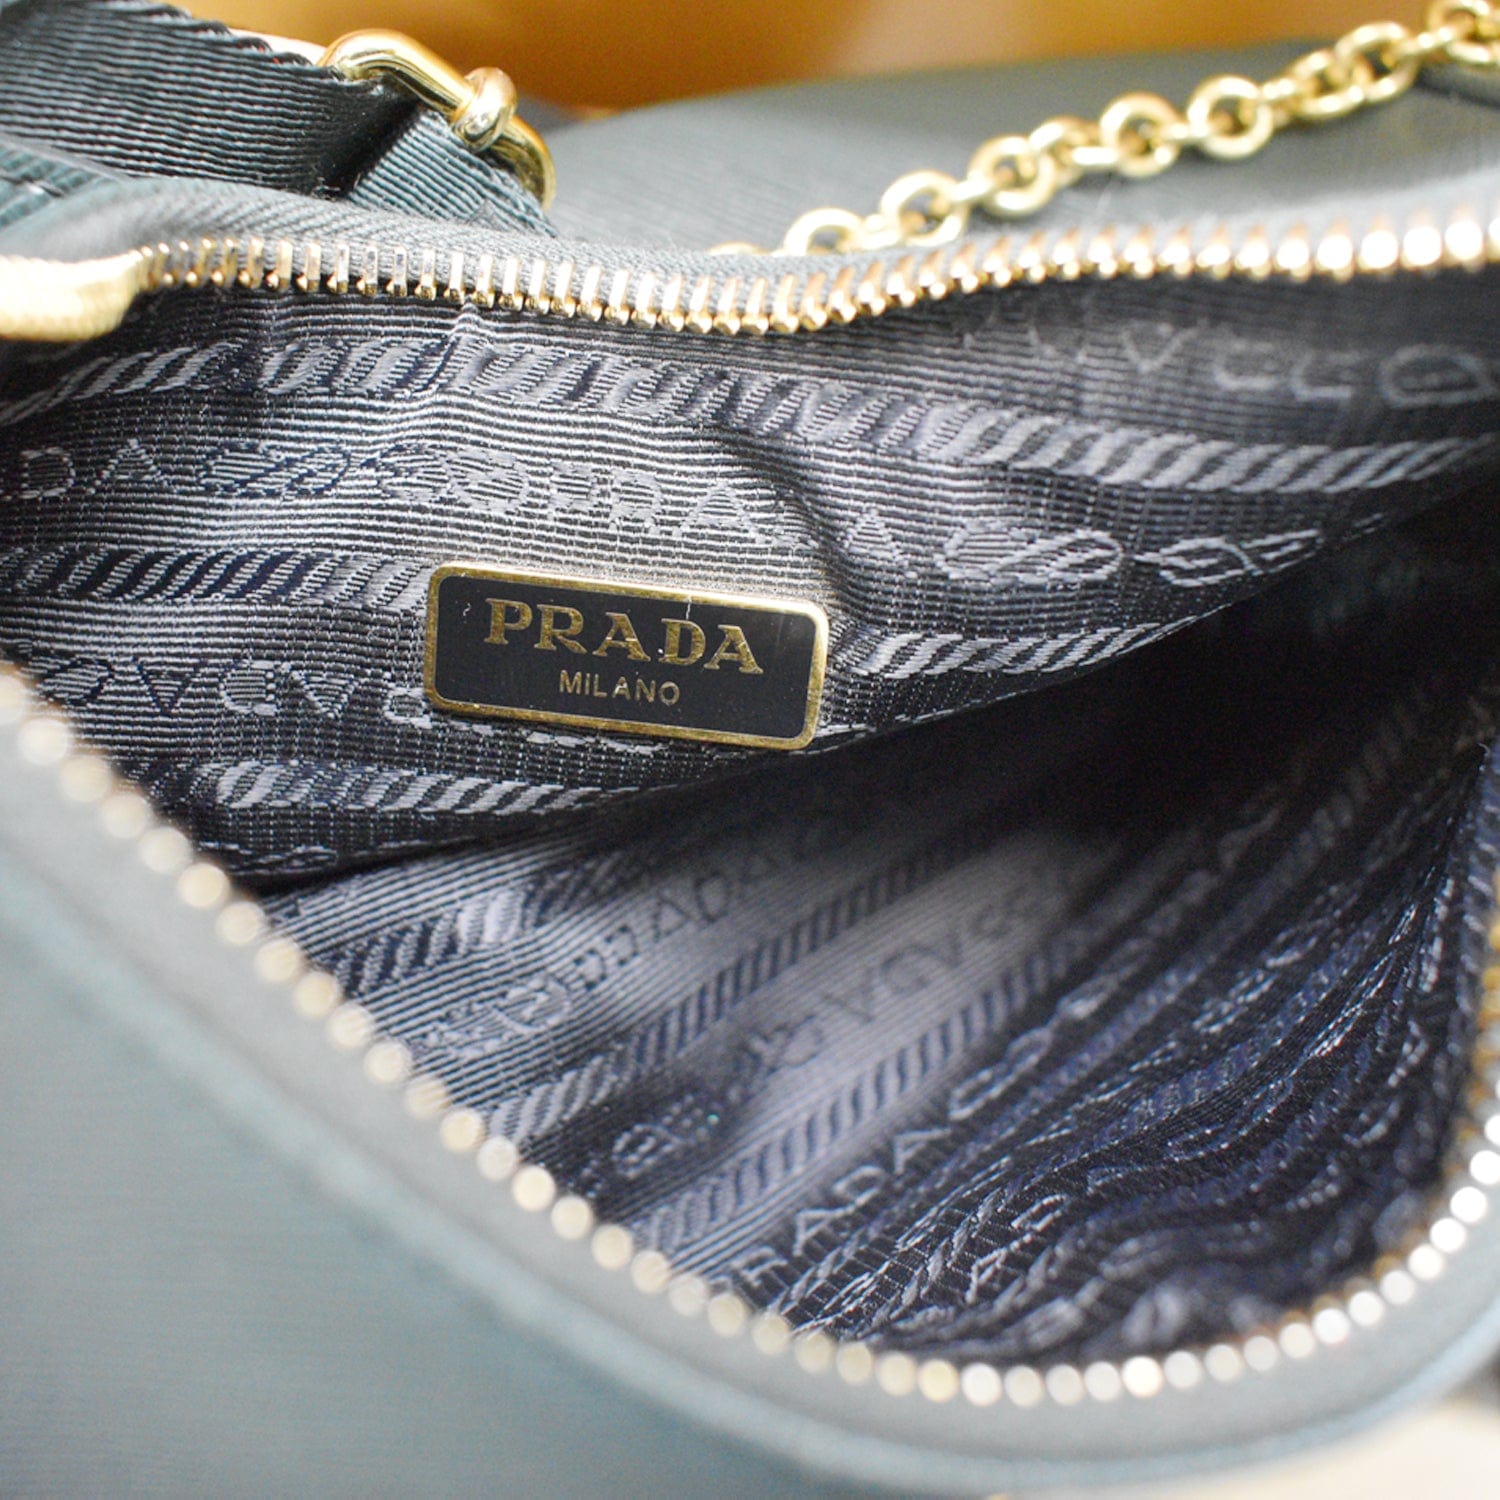 Authentic, brand new Prada re-edition leather Bag